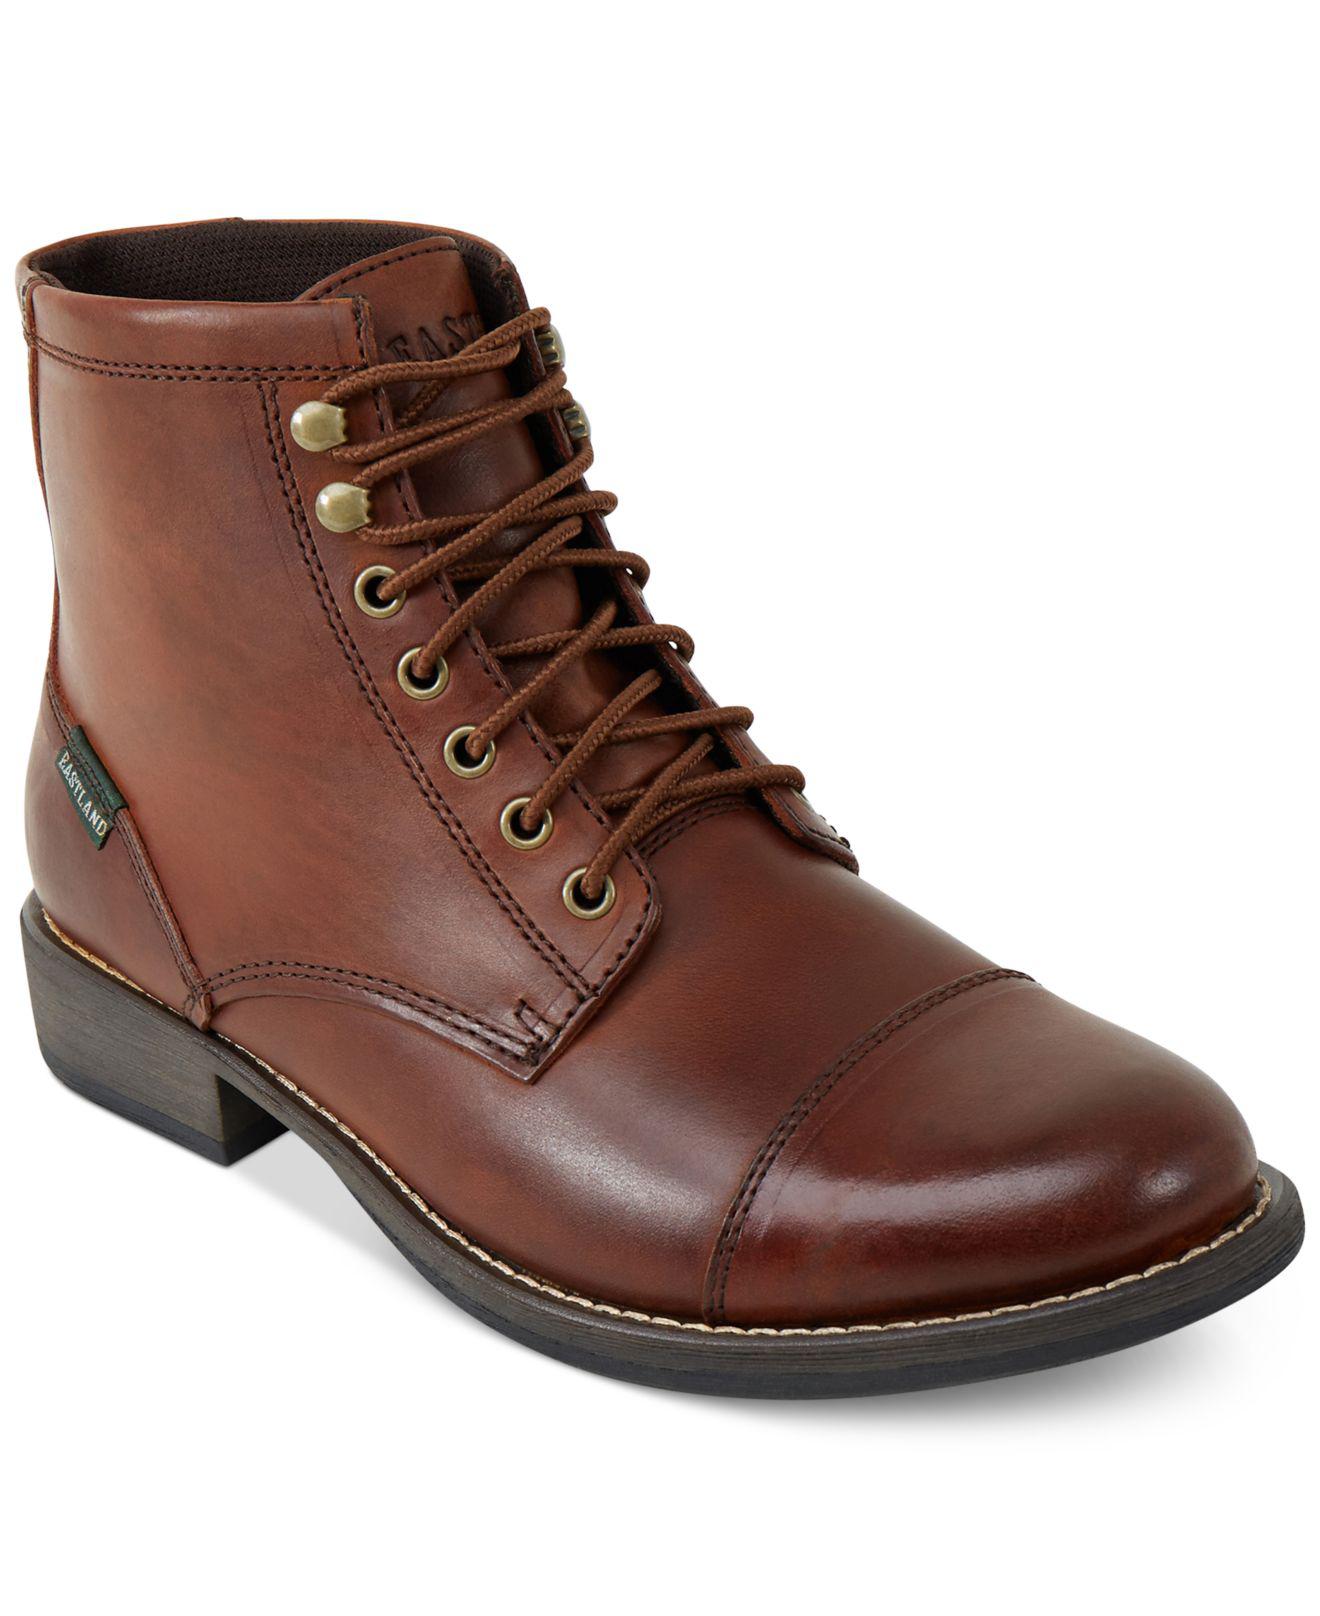 Lyst - Eastland High Fidelity Lace-up Boots in Brown for Men - Save 4%